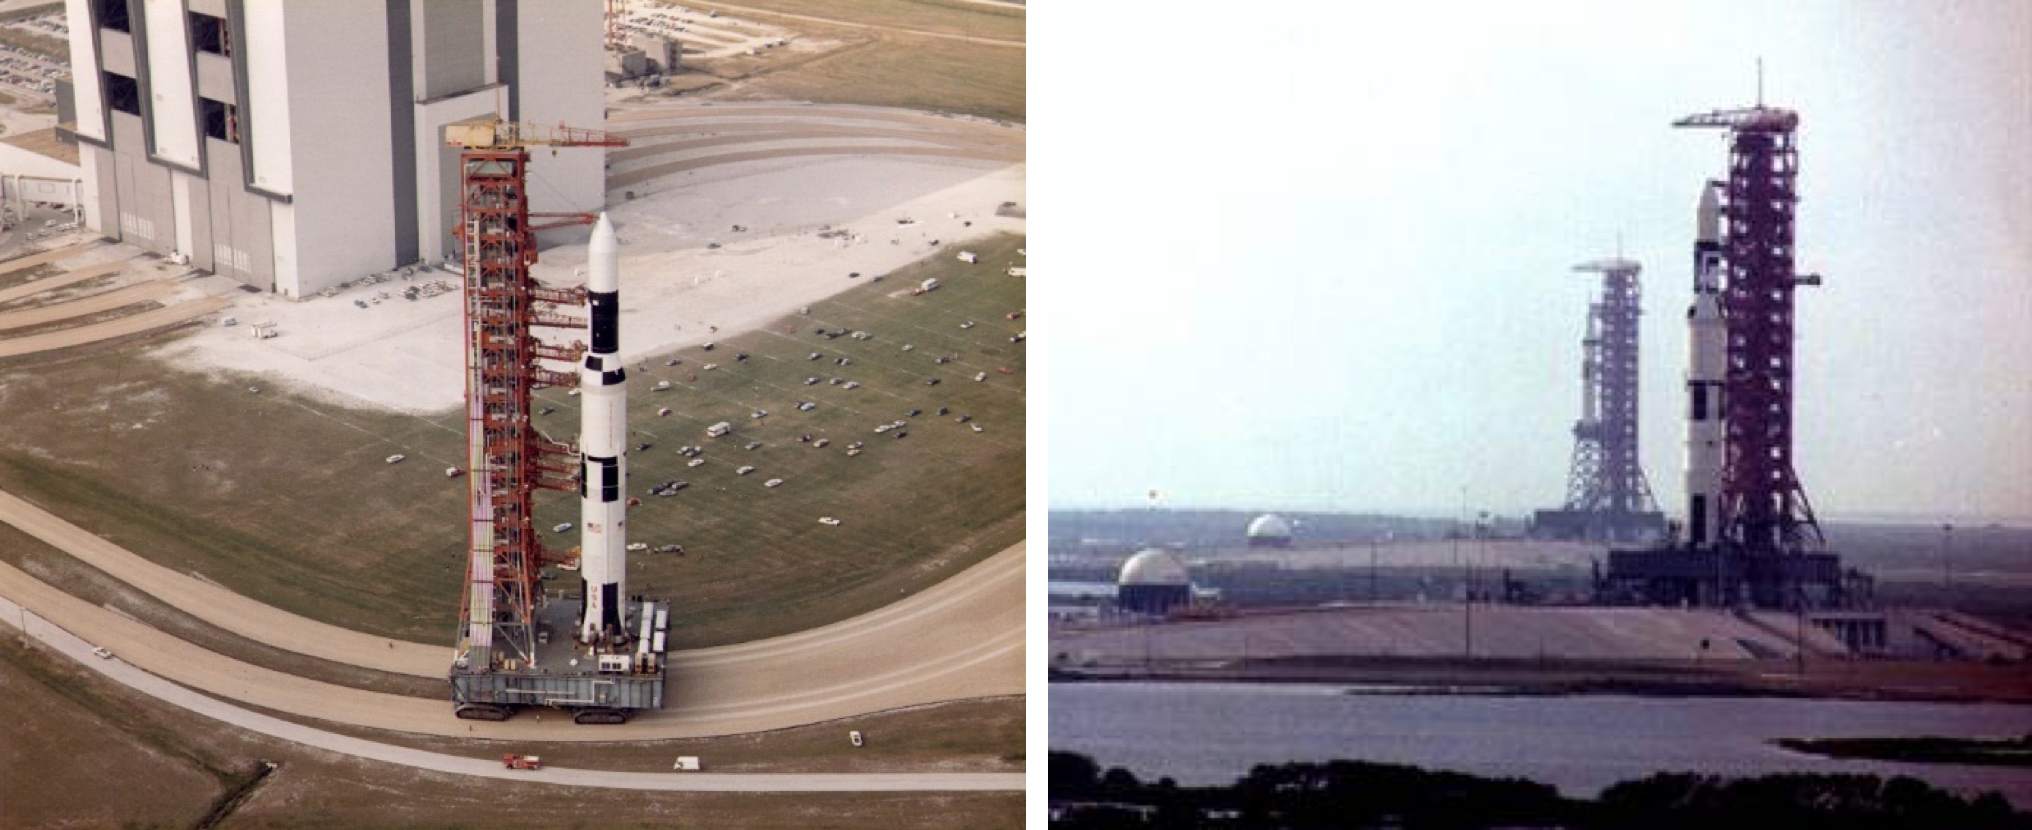 2 images. One of Skylab being rolled out from the Vehicle Assembly Building to the launchpad, and the second showing the Skylab and Skylab 2 rockets on Pads 39A and 39B respectively.